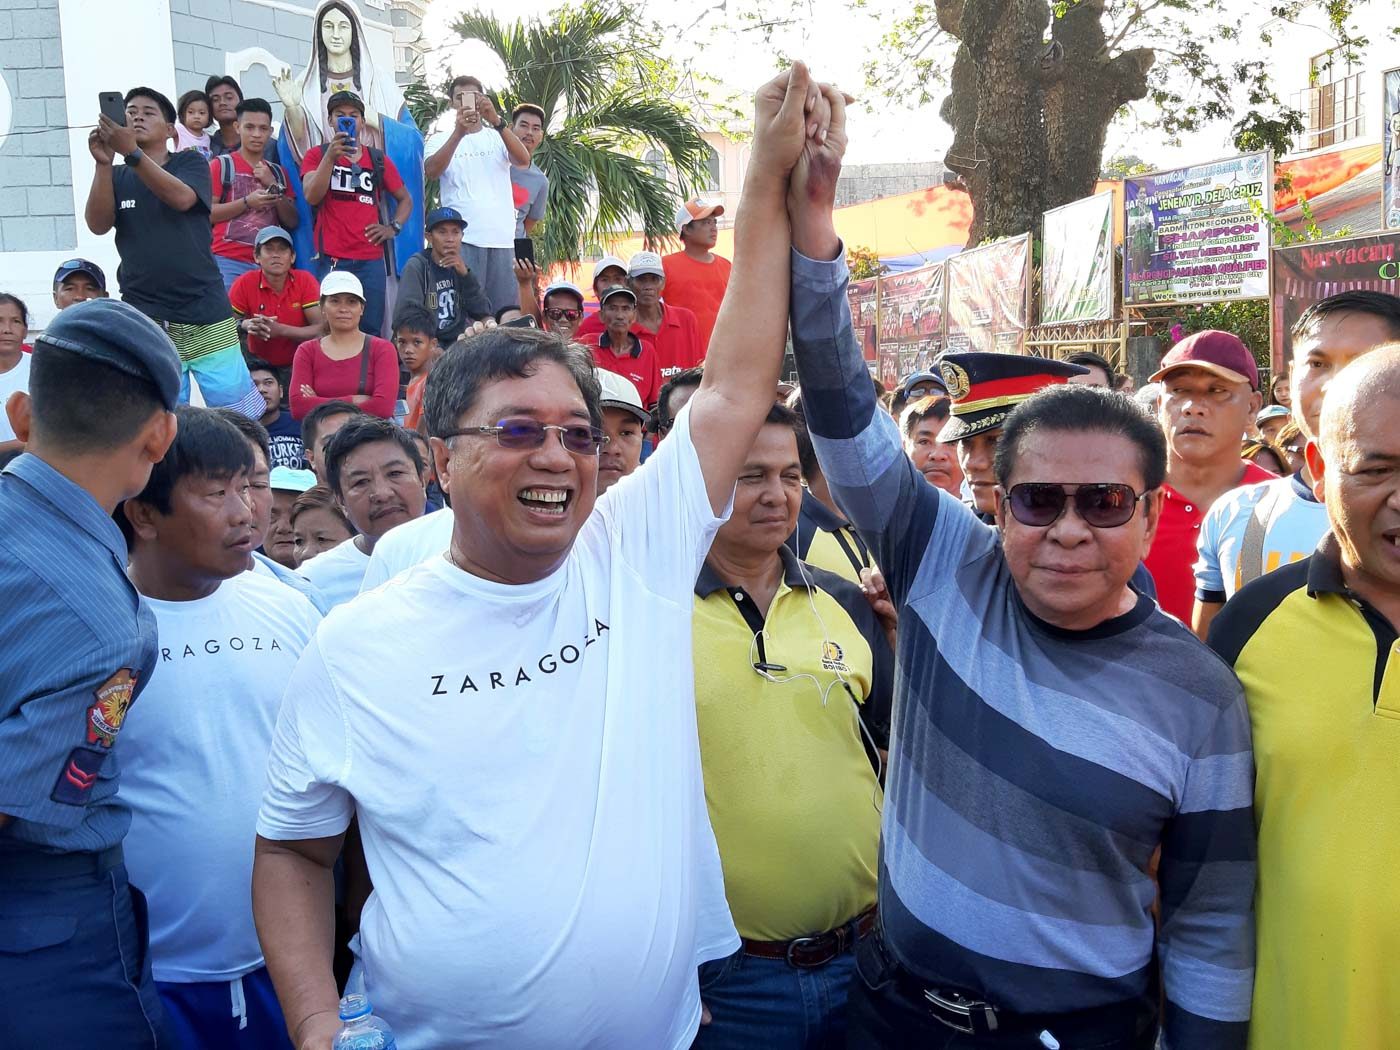 LOOK: Chavit Singson, Ed Zaragoza show who’s fit enough to be mayor of Narvacan